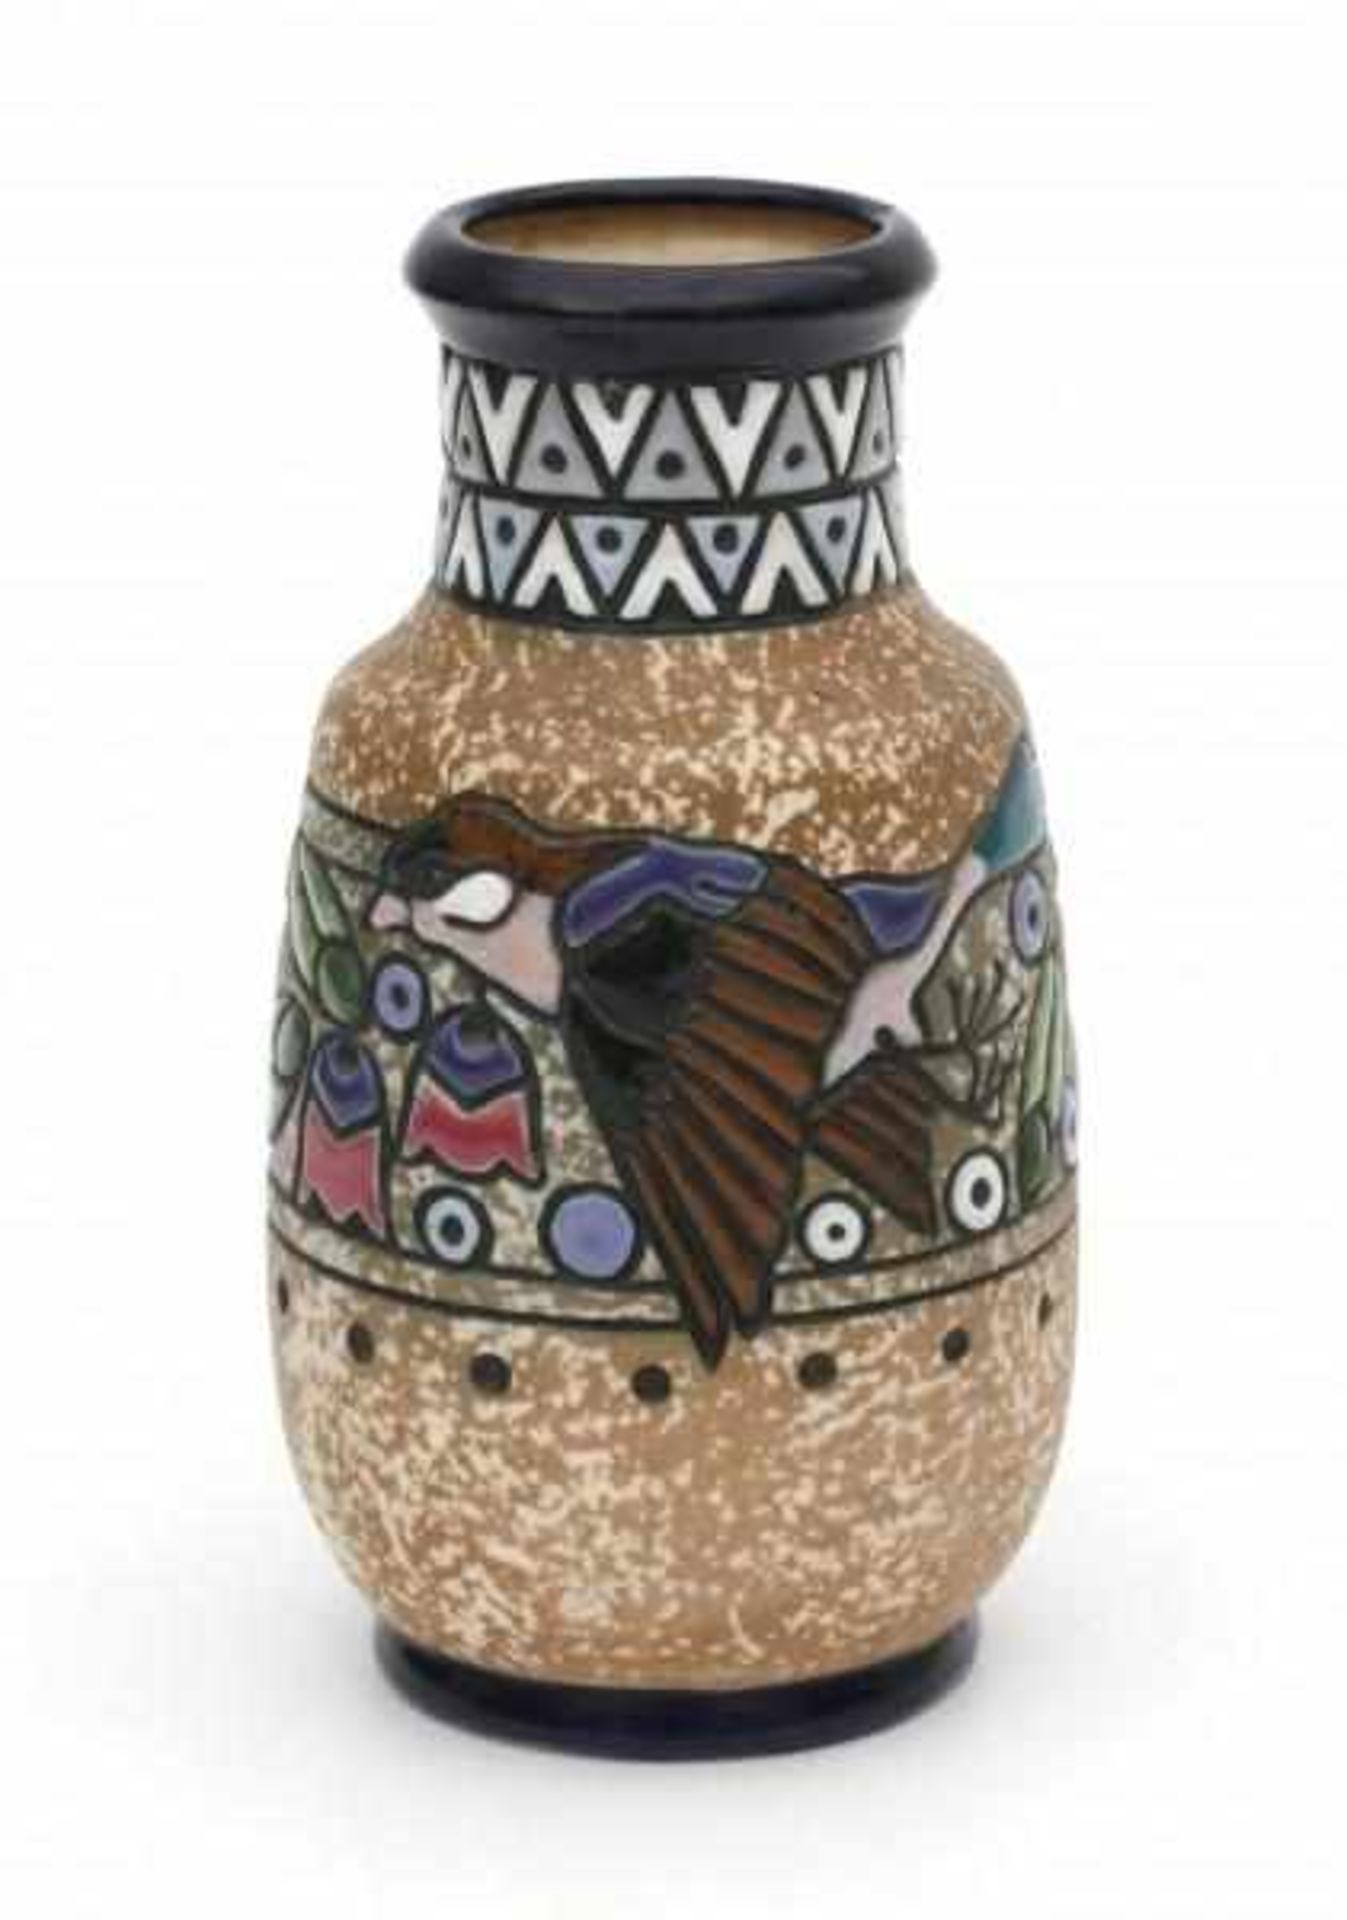 Amphora, AustriaA moulded ceramic vase decorated with a flying bird amidst stylized floral